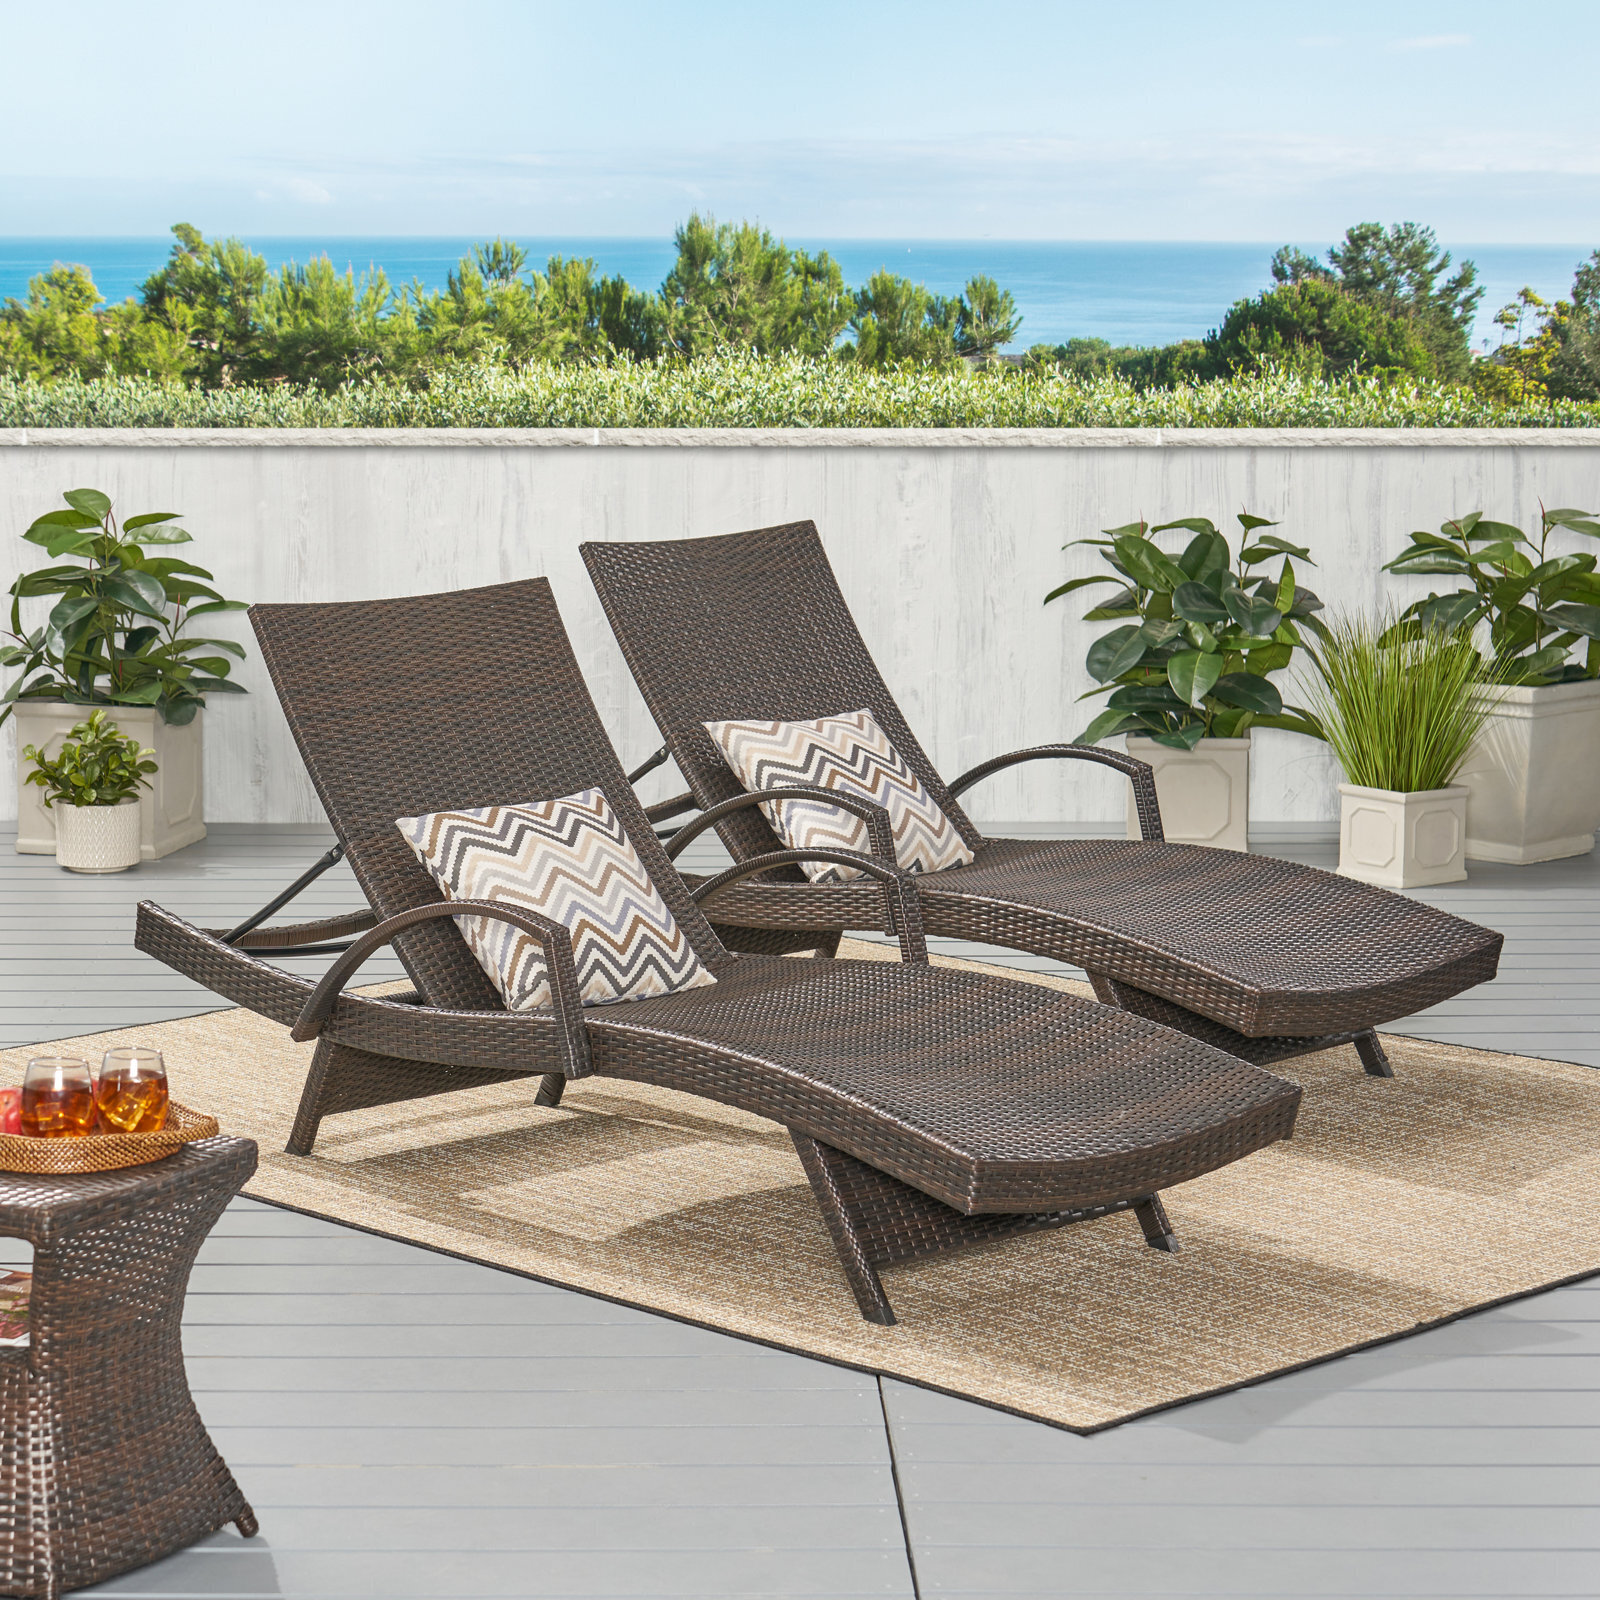 Set of 2 Olivia Outdoor Brown Wicker Armed Chaise Lounge Chair 